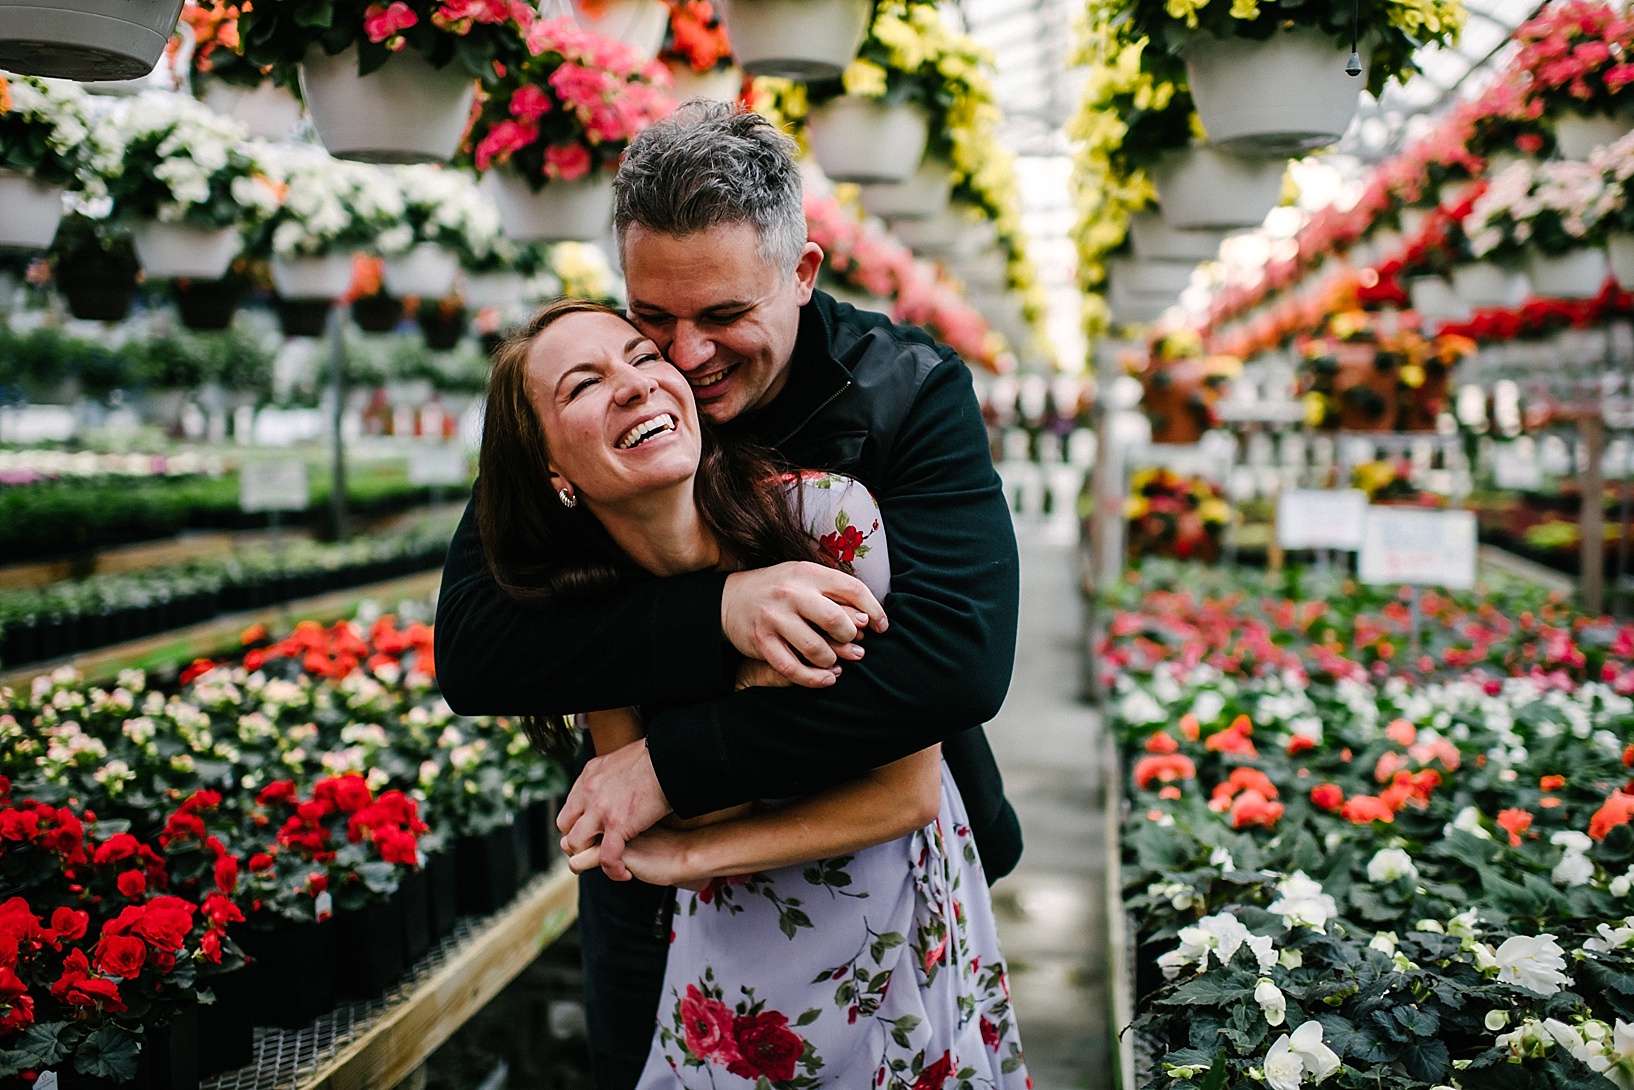 man hugging woman wearing floral dress in a greenhouse